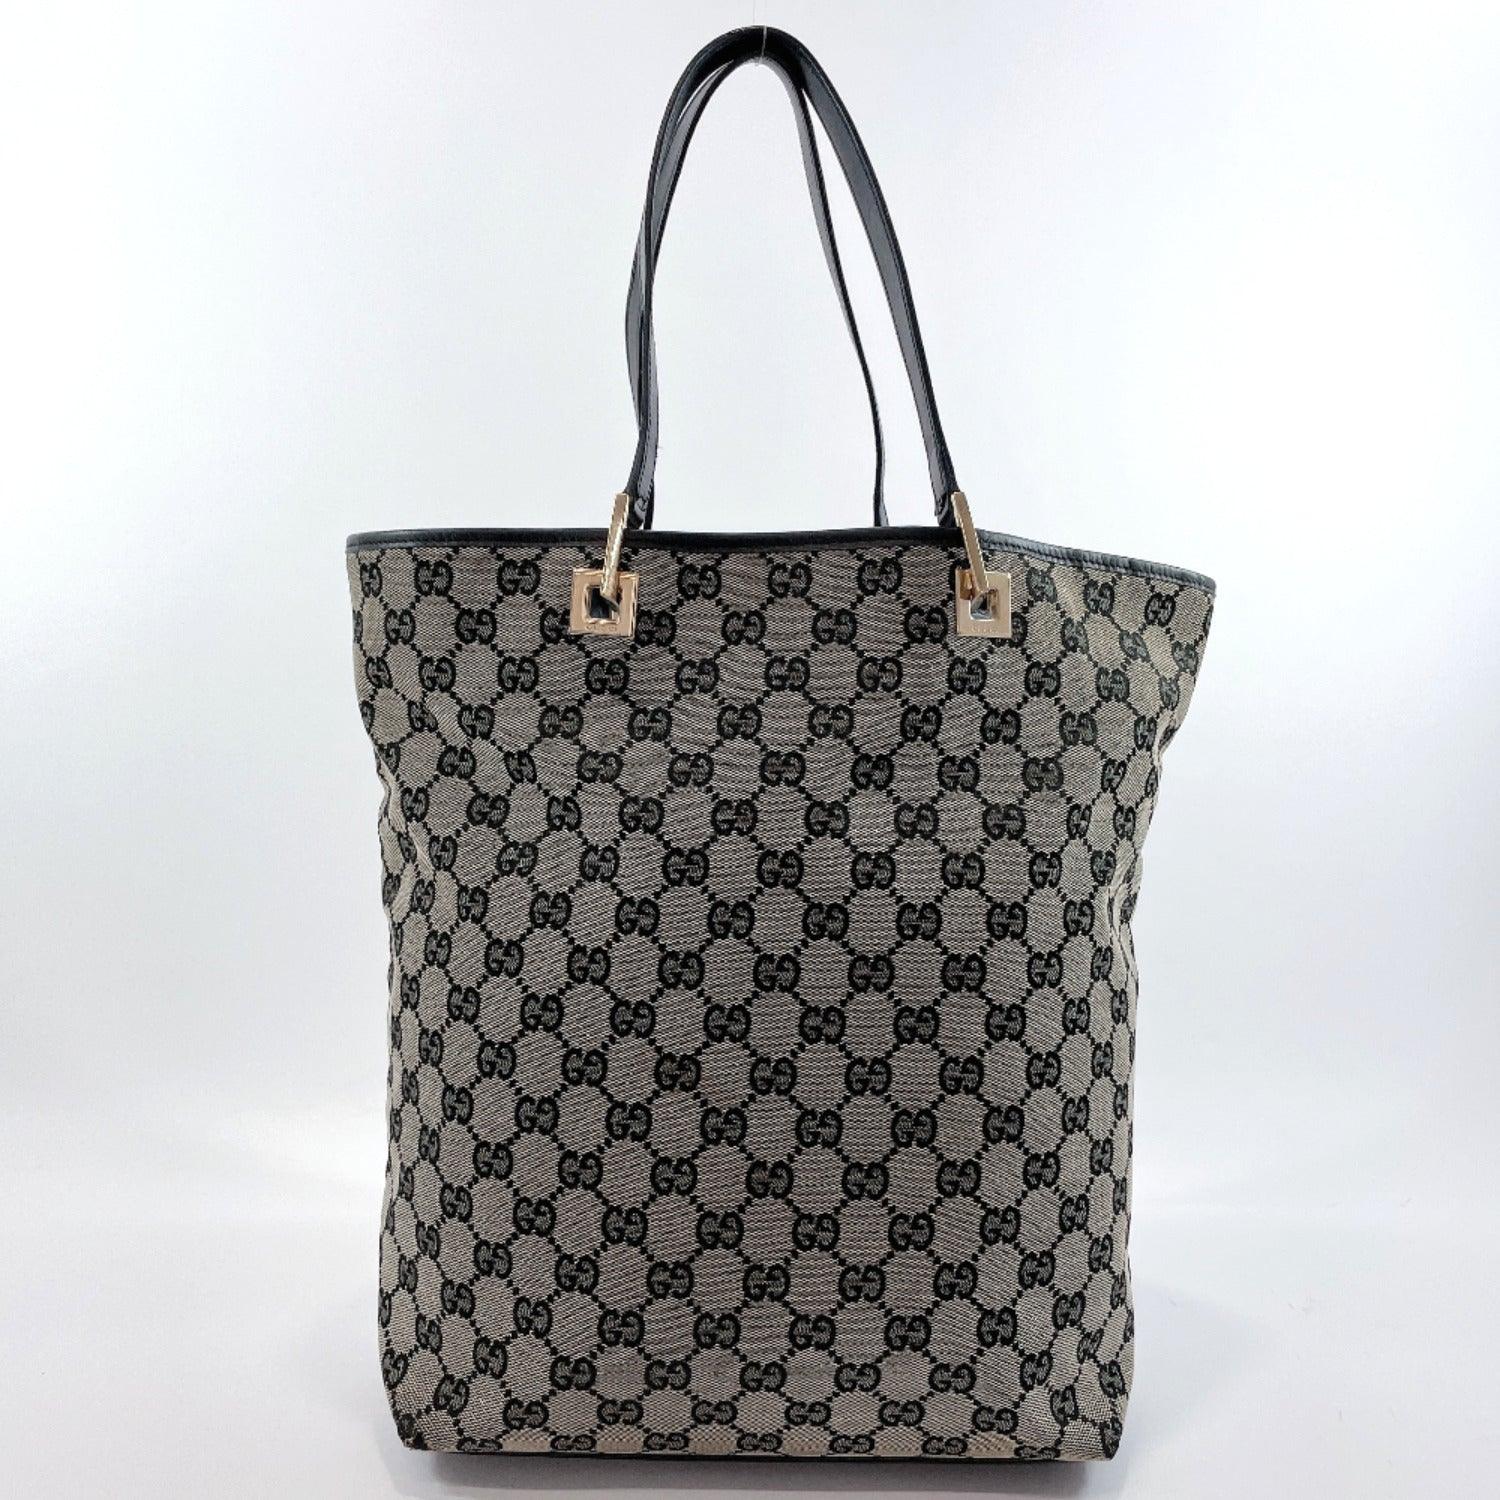 GUCCI Tote Bag 002.1098 GG canvas/leather Black Women Used